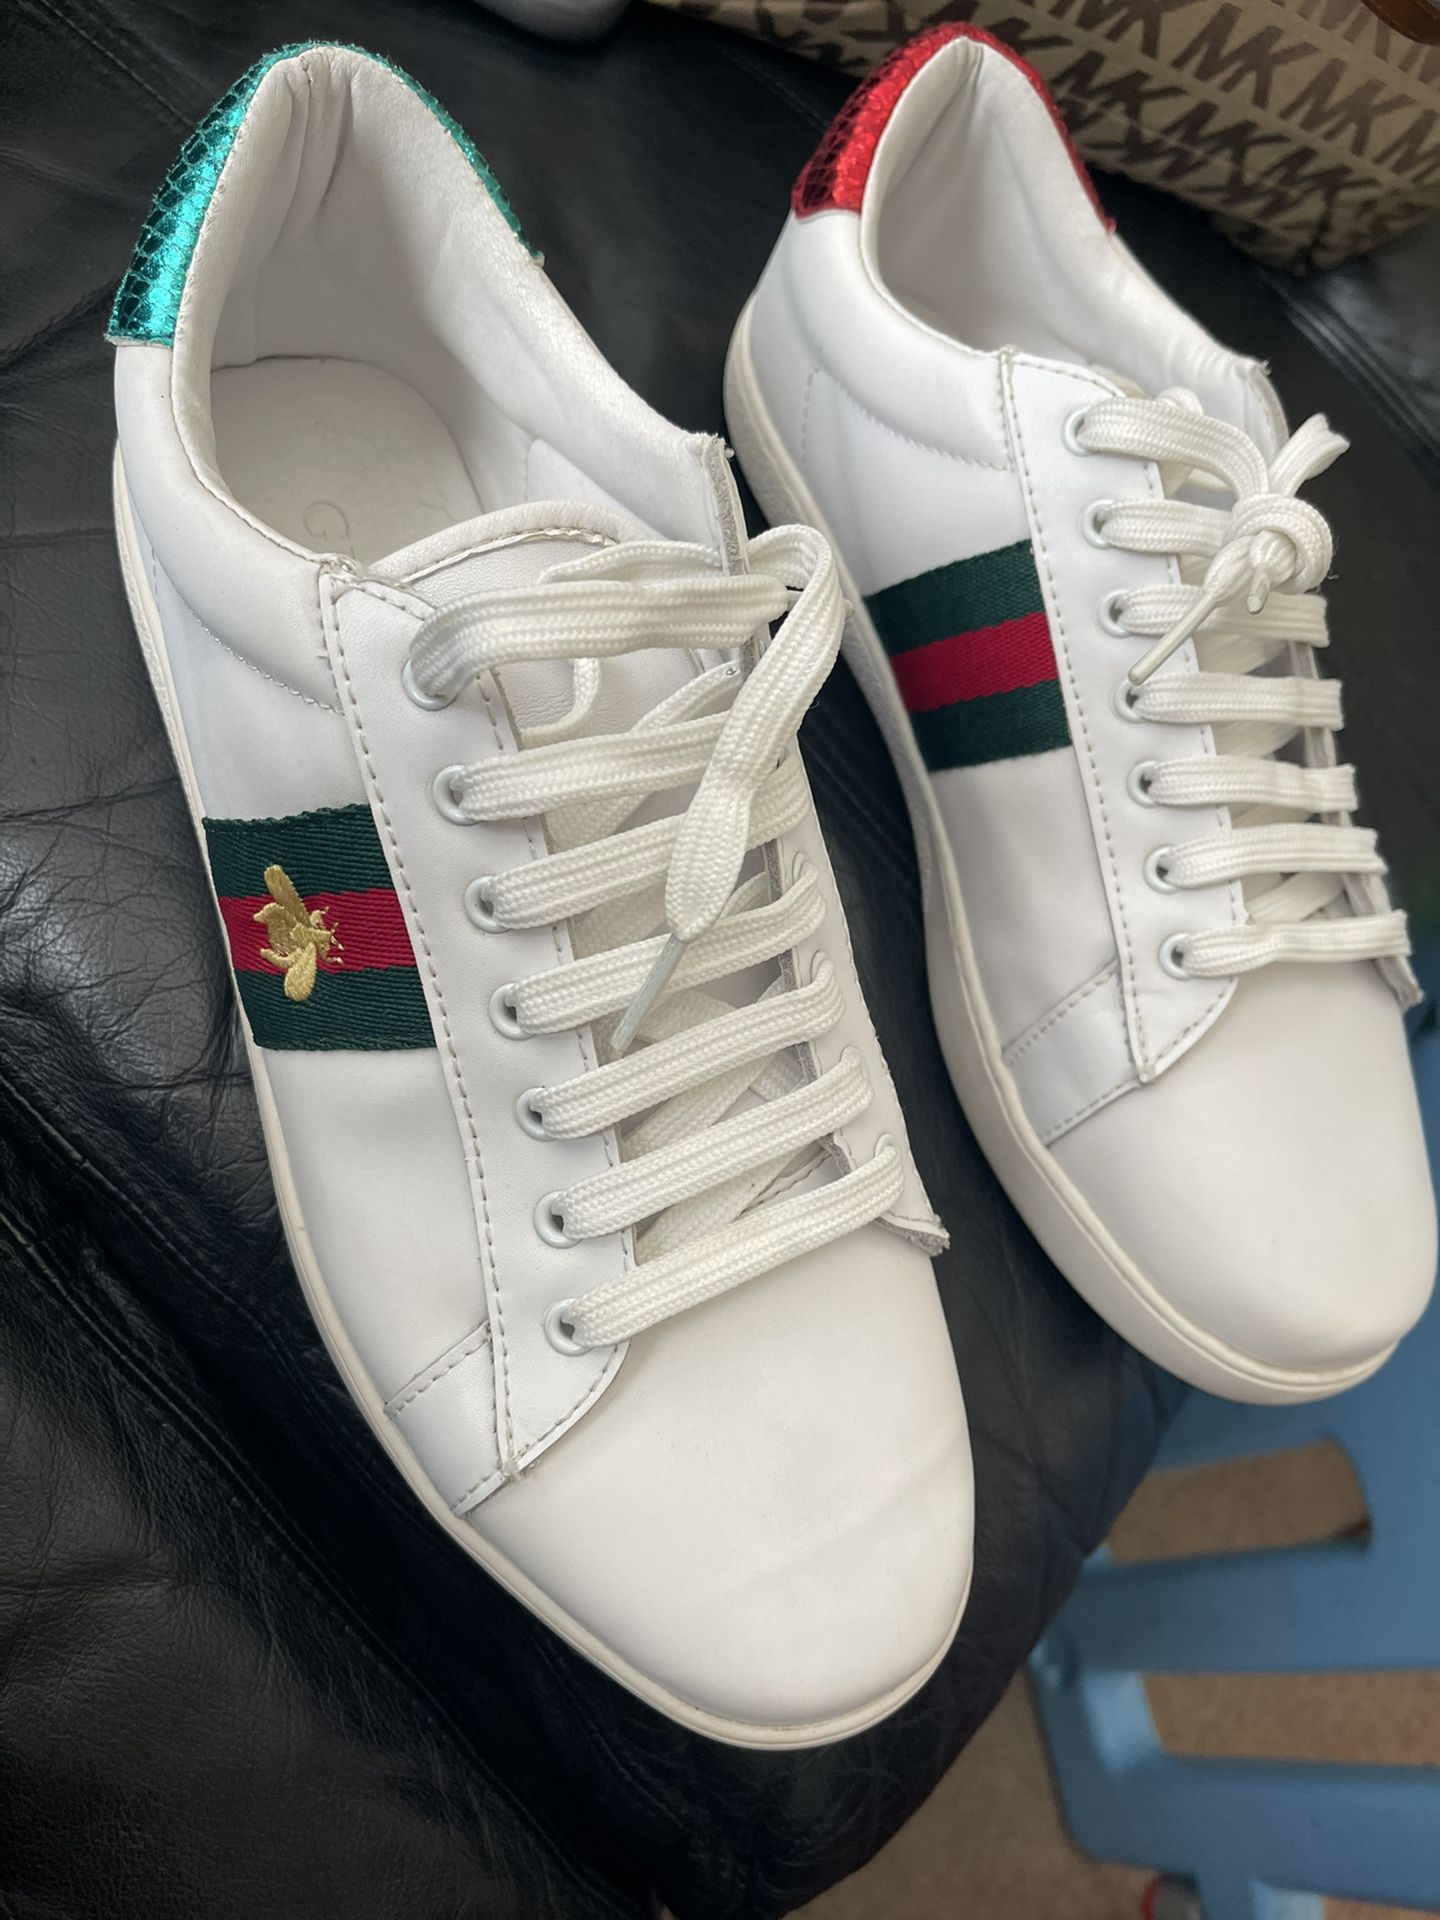 invadere turnering strubehoved Authentic Gucci Shoes For Men for Sale in Lathrop, CA - OfferUp